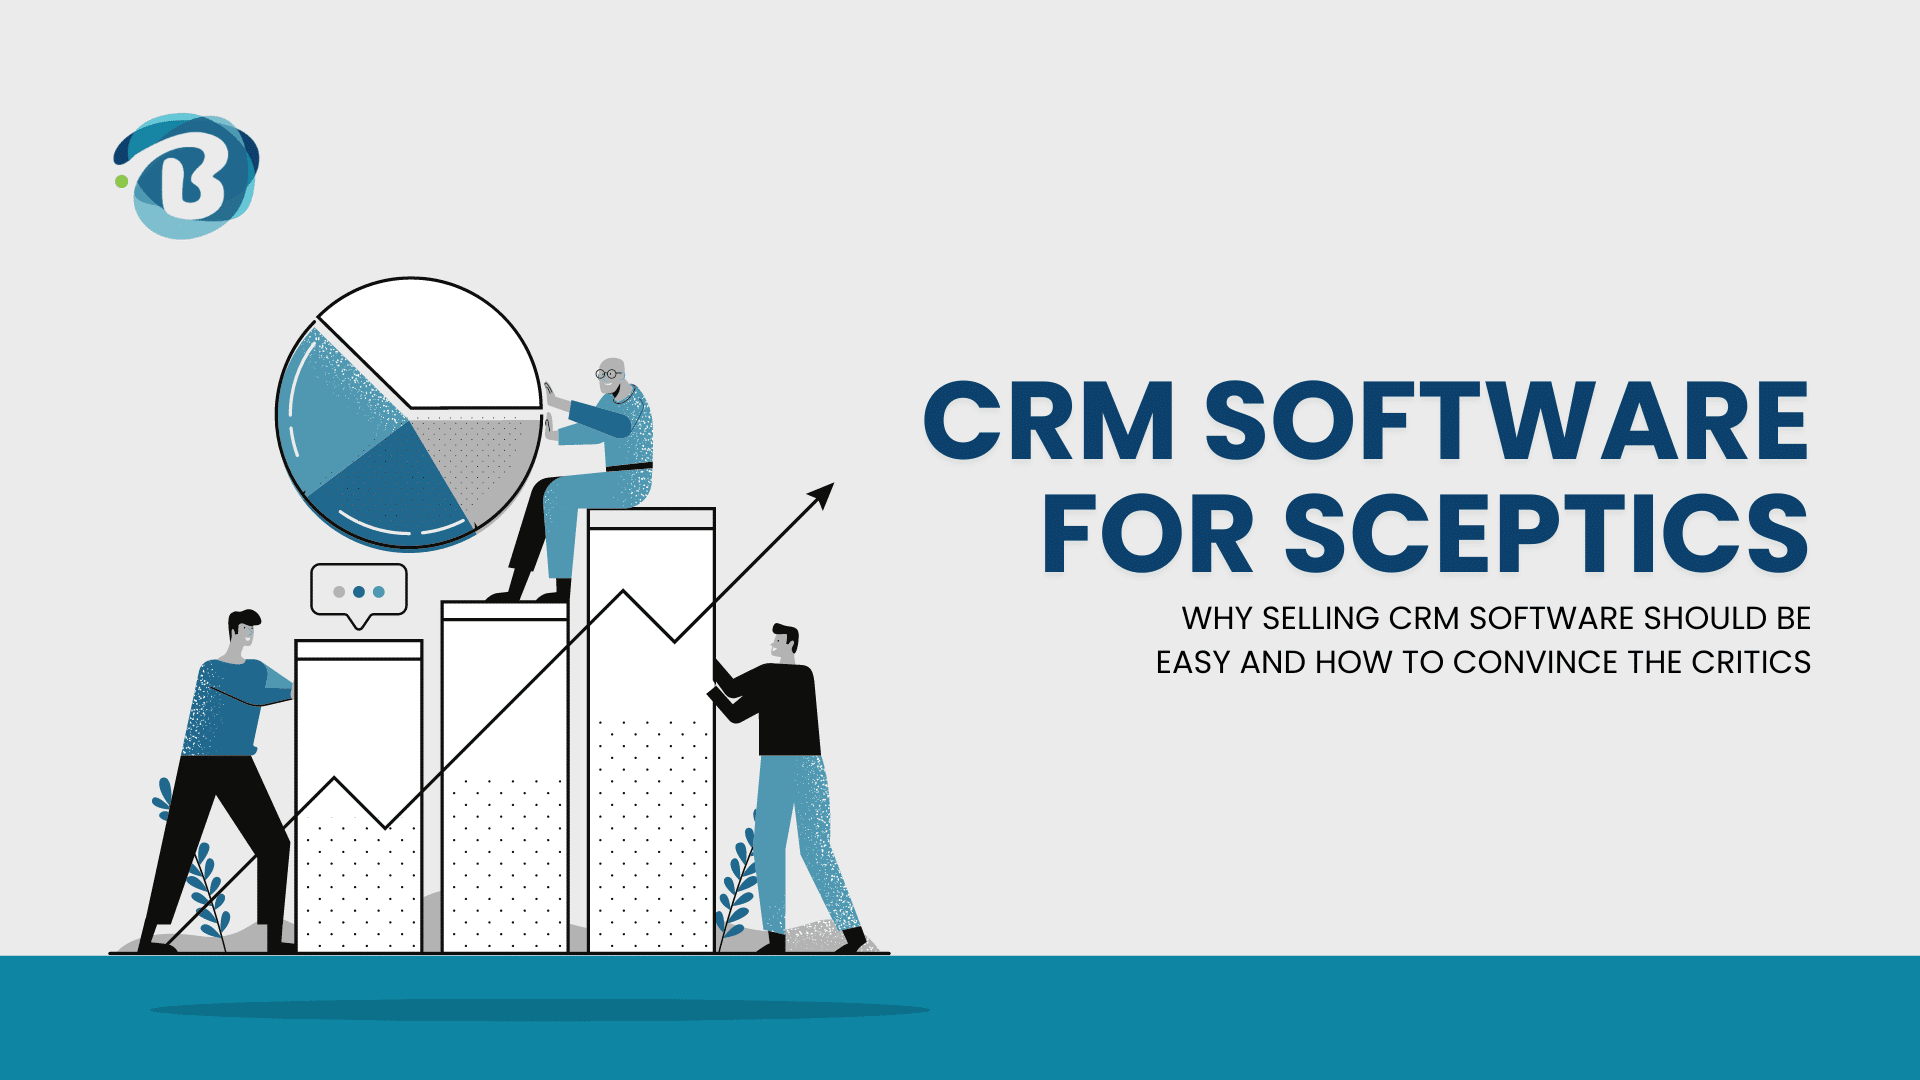 Selling CRM software to sceptics